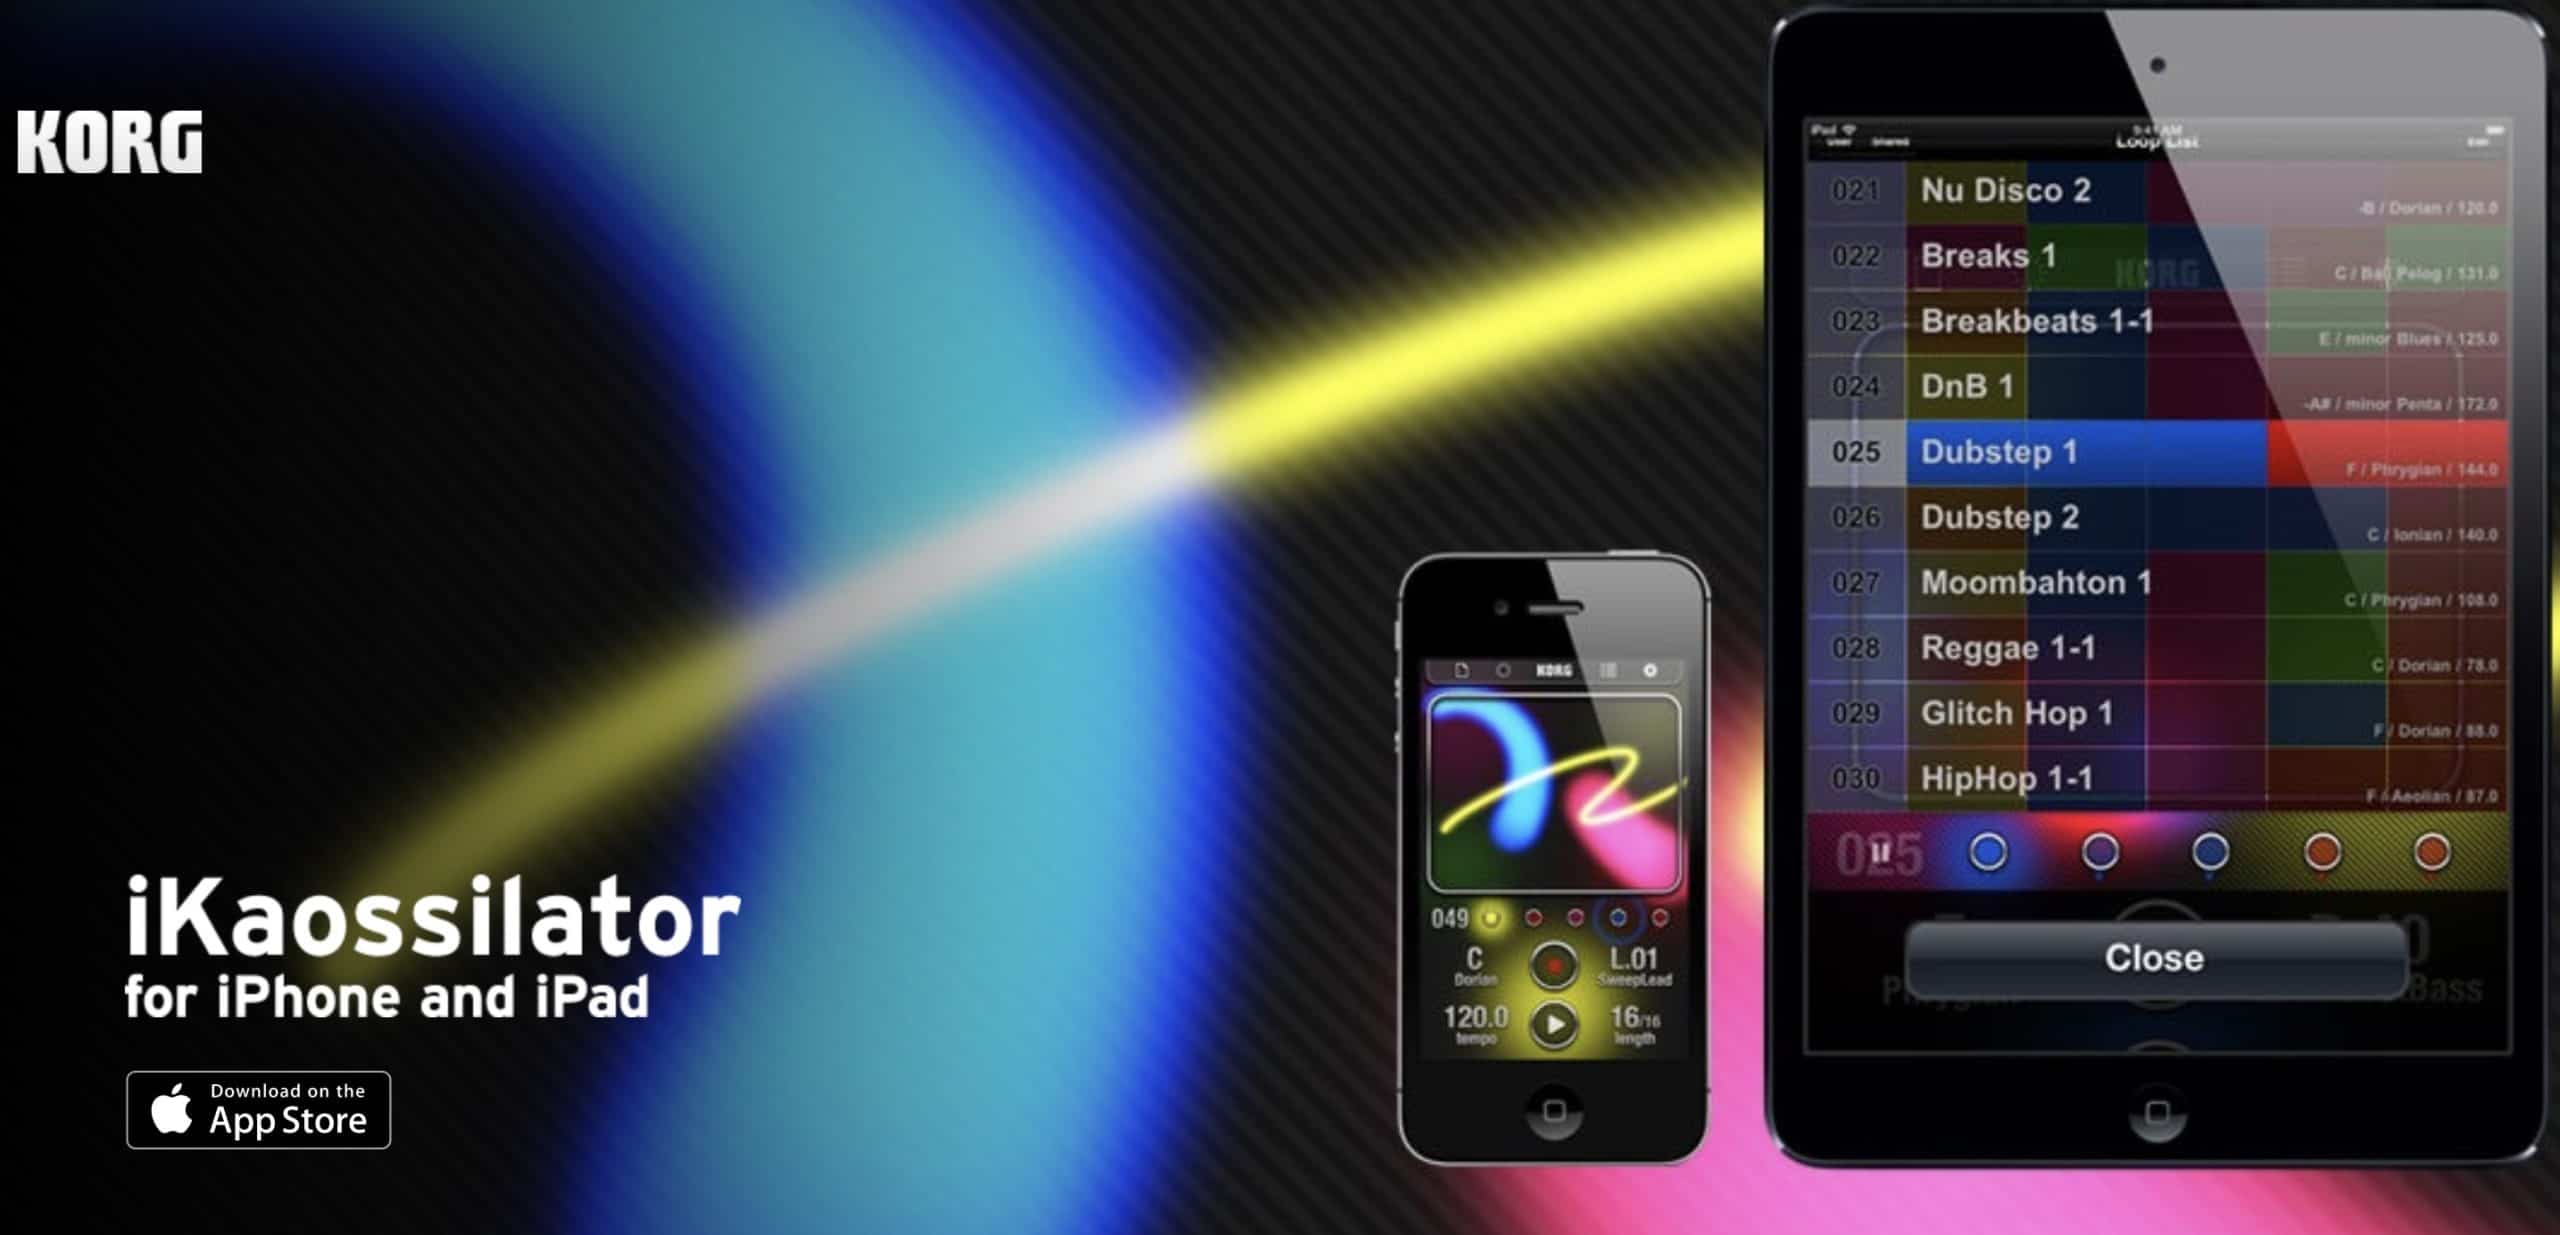 Kaossilator App for iOS and Android Free For A Limited Time scaled